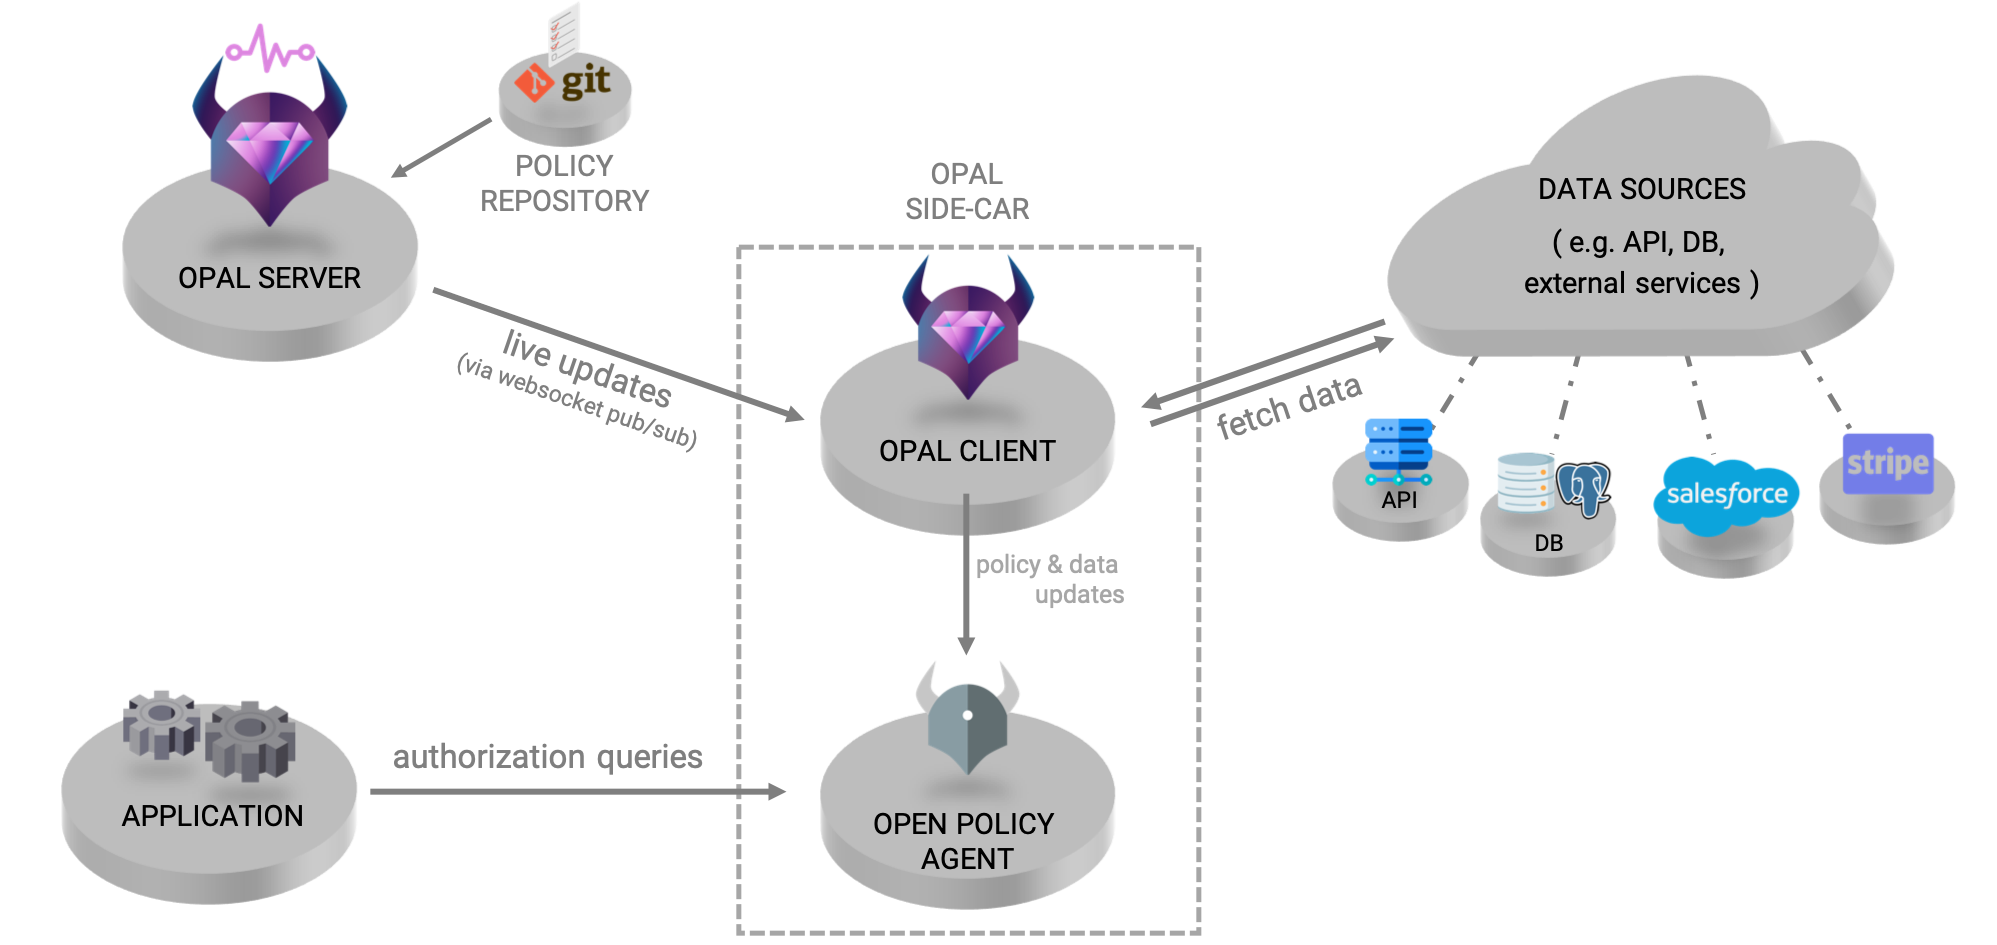 OPAL’s architecture